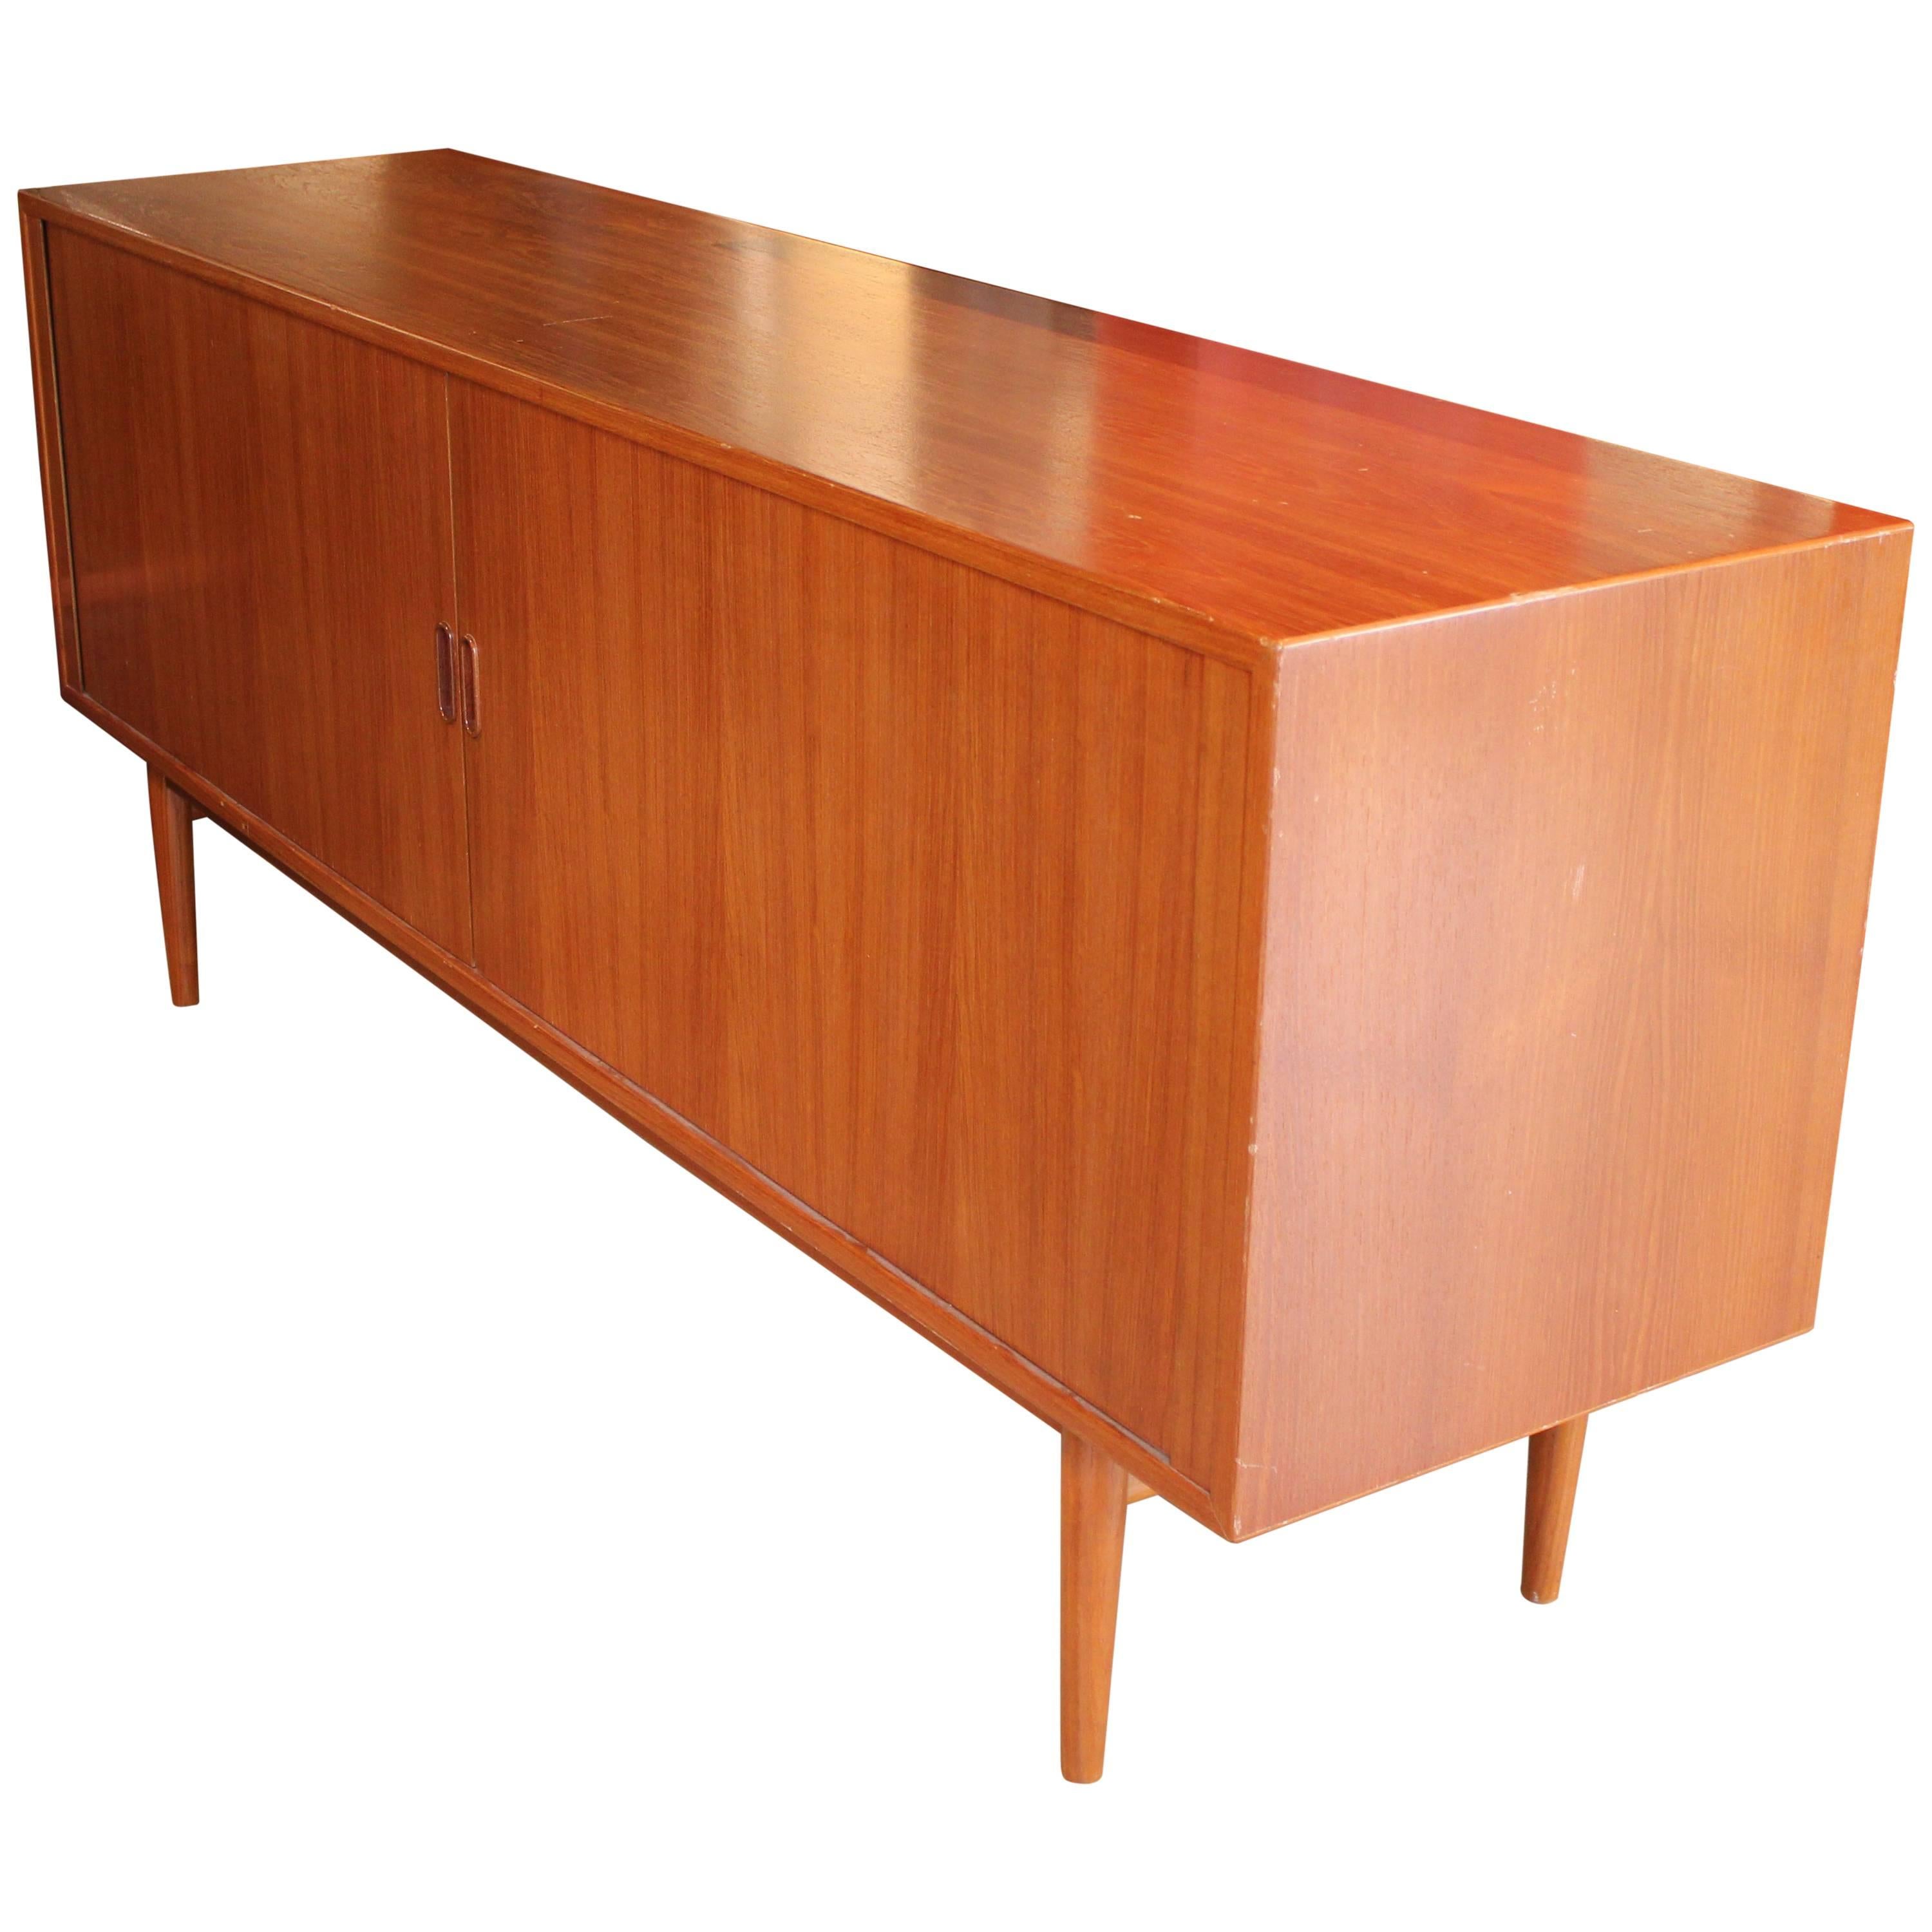 Gorgeous teak credenza or sideboard by Arne Vodder for Sibast Furniture with tambor doors.  The two doors open to reveal various shelving options and two drawers. Perfect for any modern or mid-modern space. 